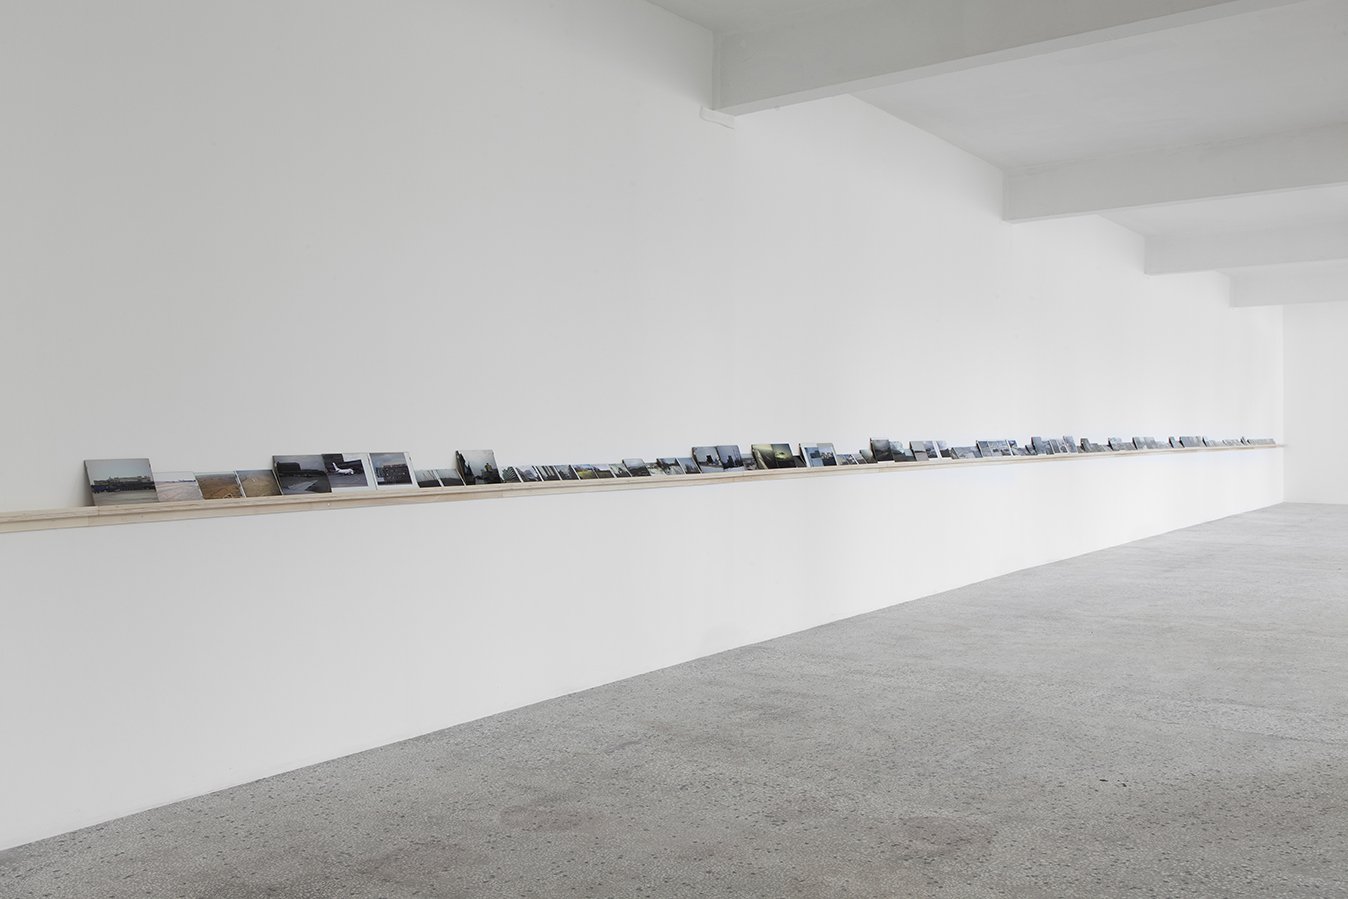 Vangelis Vlahos, Is There Any Oversight On Ocalan?, 119 photographs (framed), dimensions variable (biggest 24 x 30 cm, smallest 10 x 15 cm) on a wall mounted shelf (23 m long), 2009-2011